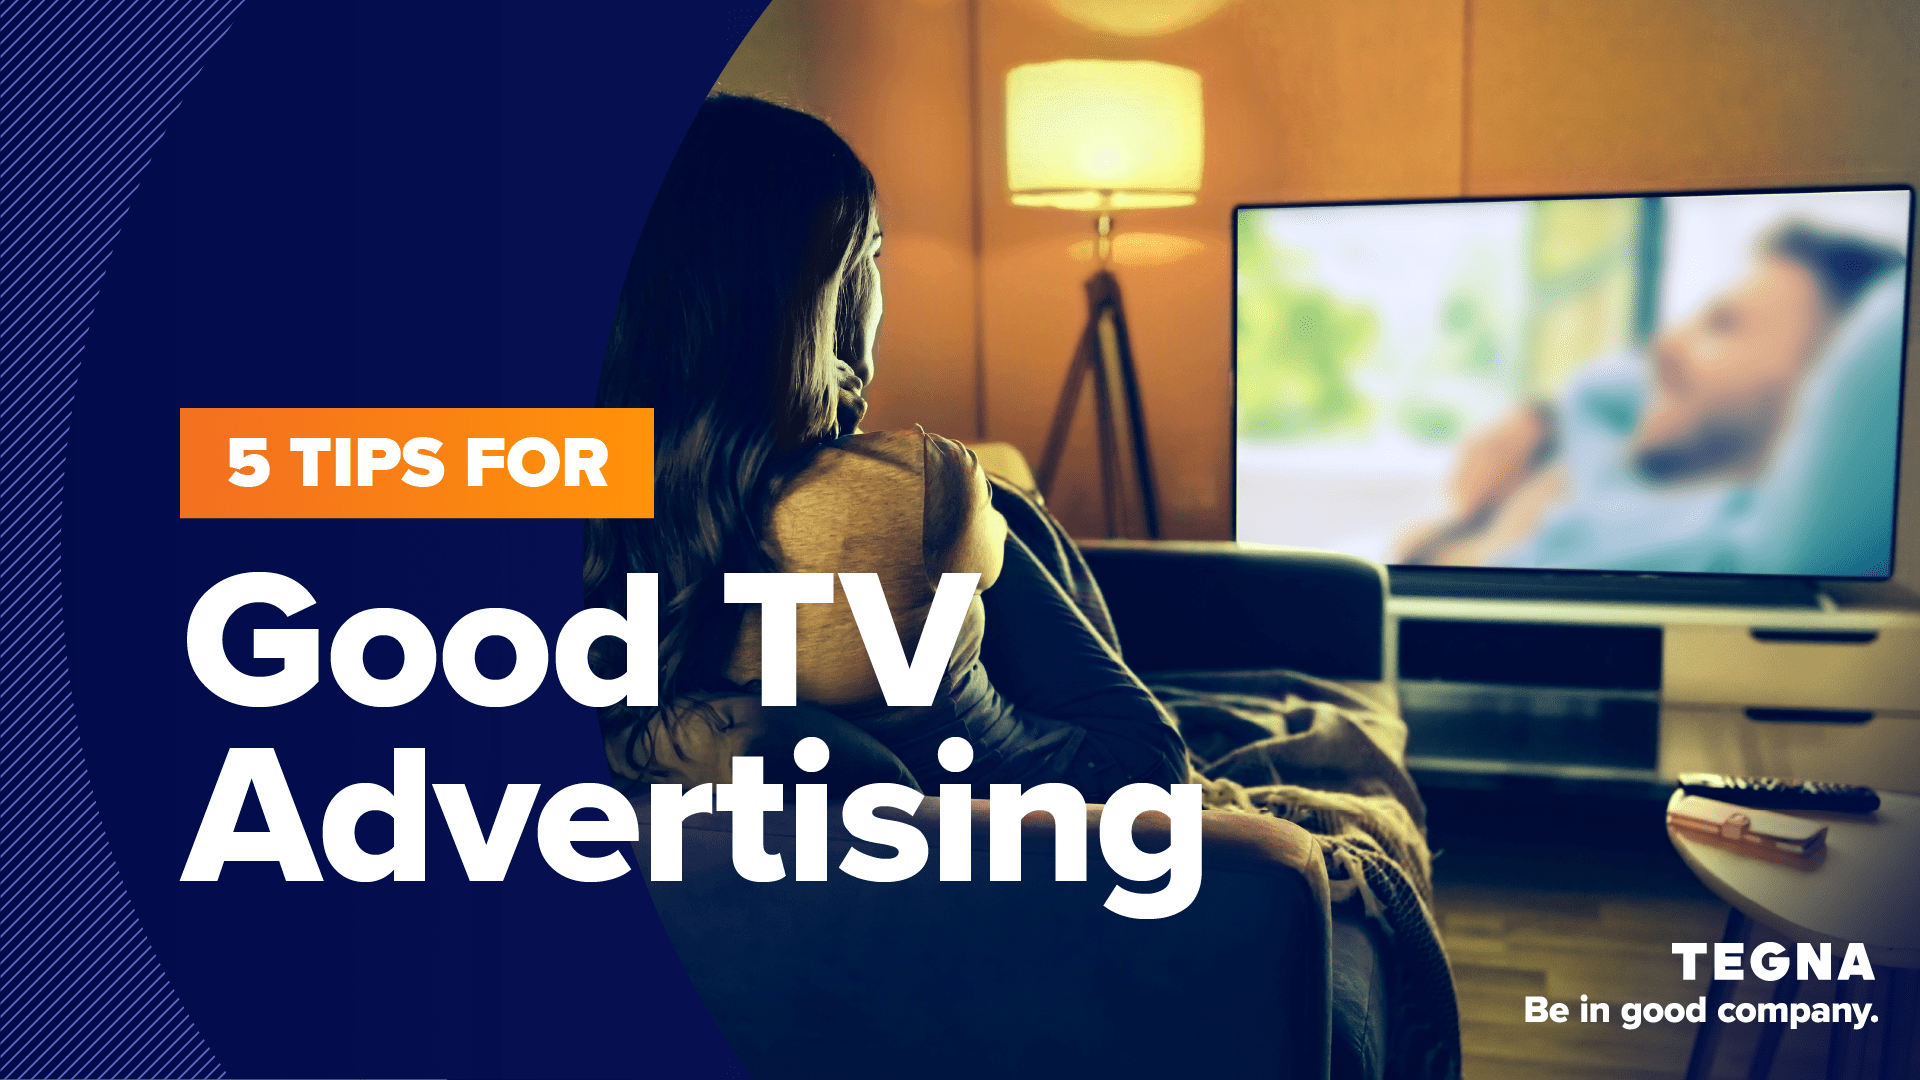 TEGNA Advertise - 5 Tips for Effective Advertising